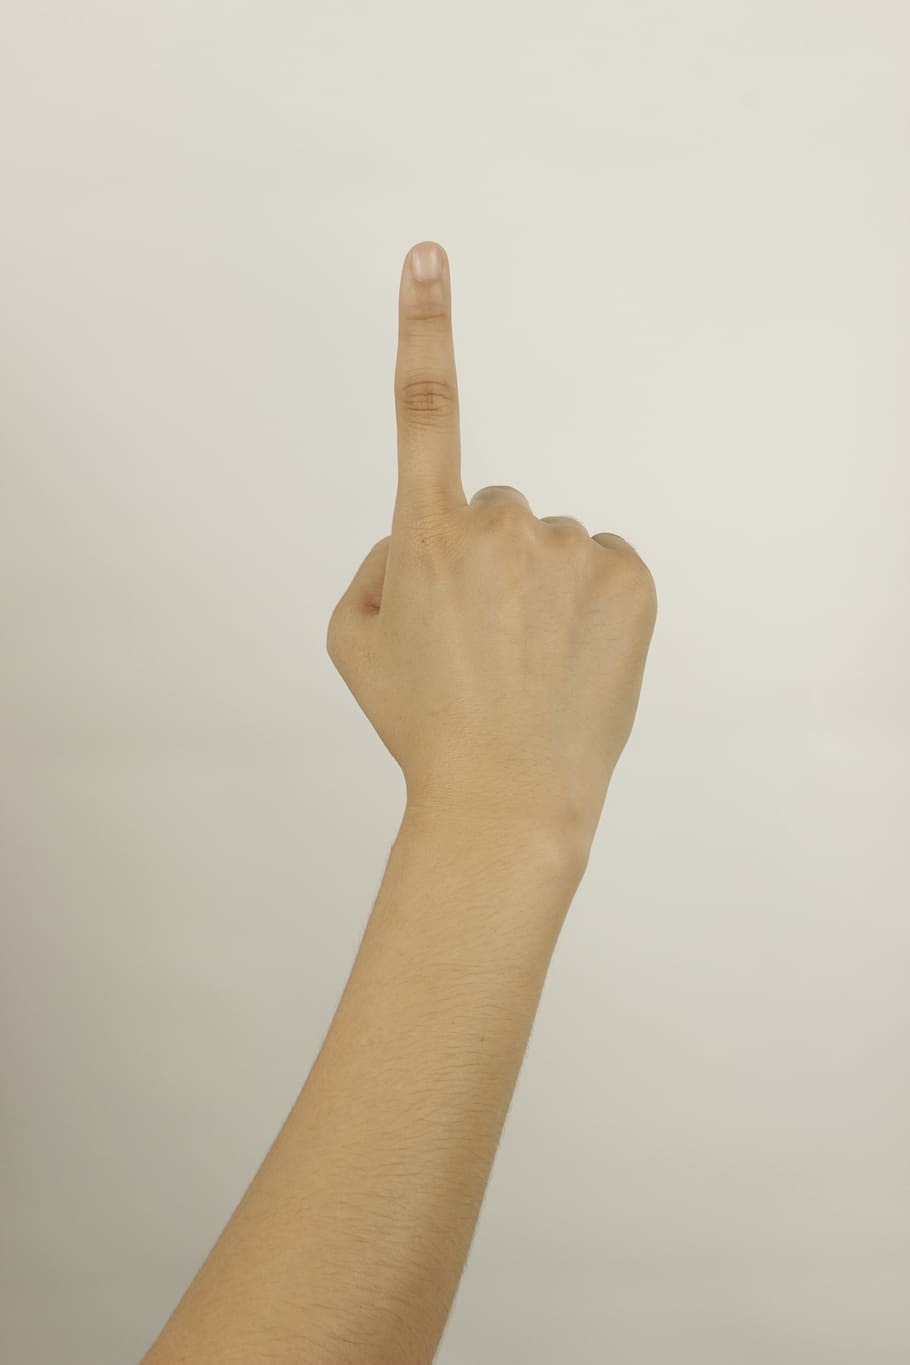 right person, index finger, hand, finger, the gesture, gesturing, human Hand, human Finger, thumb, people